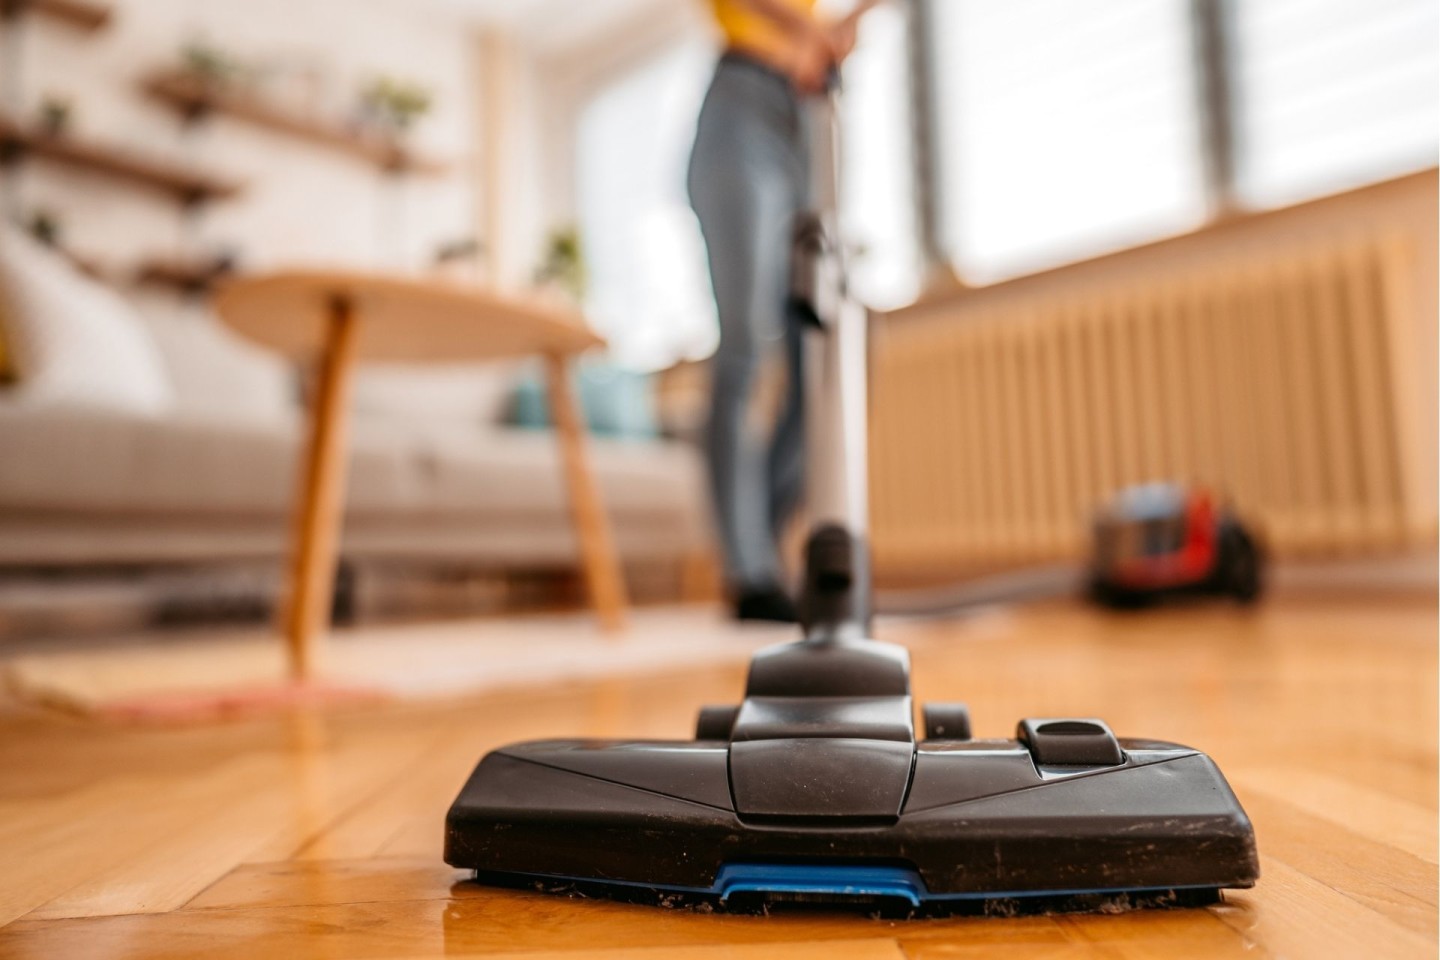 person vacuuming floor, which creates white noise